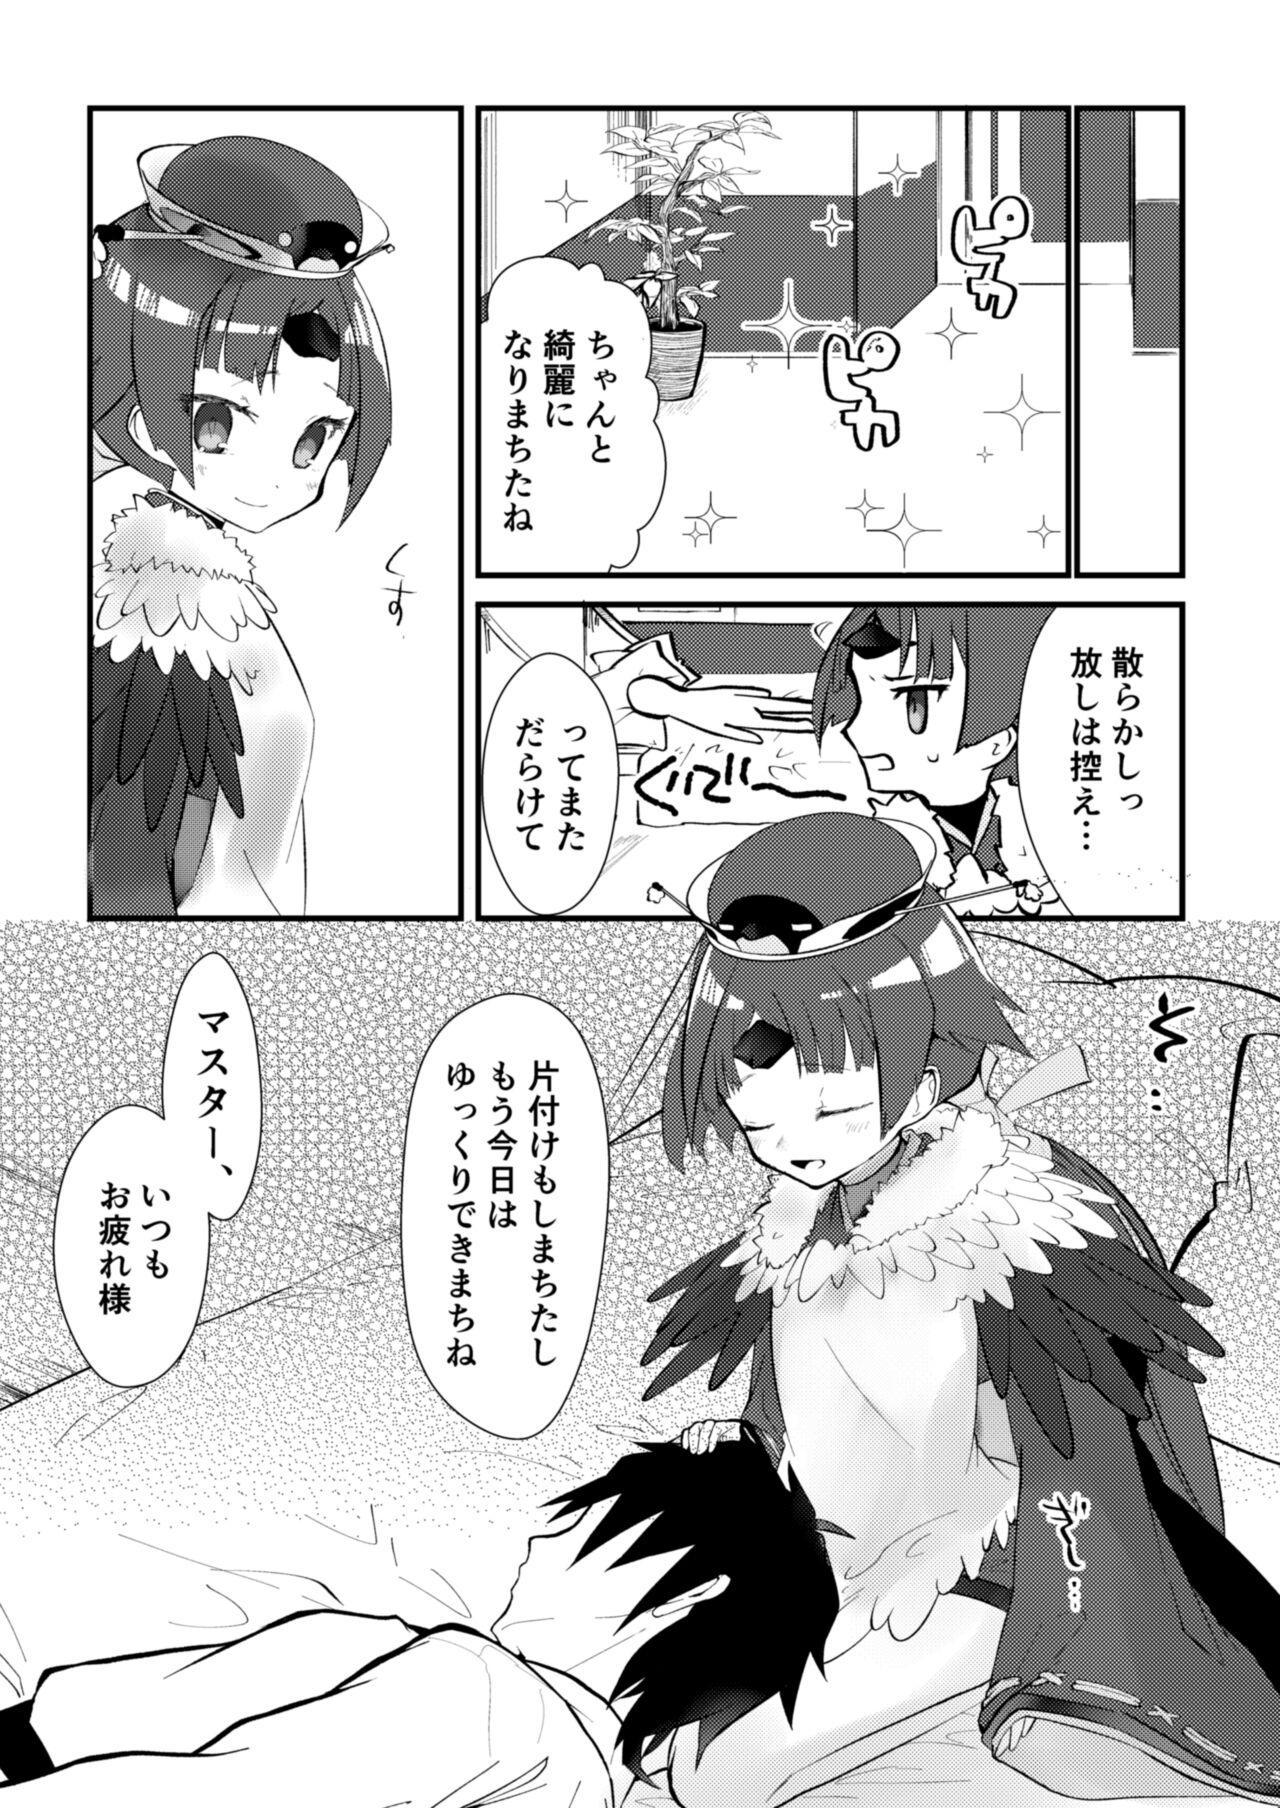 Mexicano 休日はゴロゴロして紅ちゃんとセックスしたい - Fate grand order Francais - Page 4